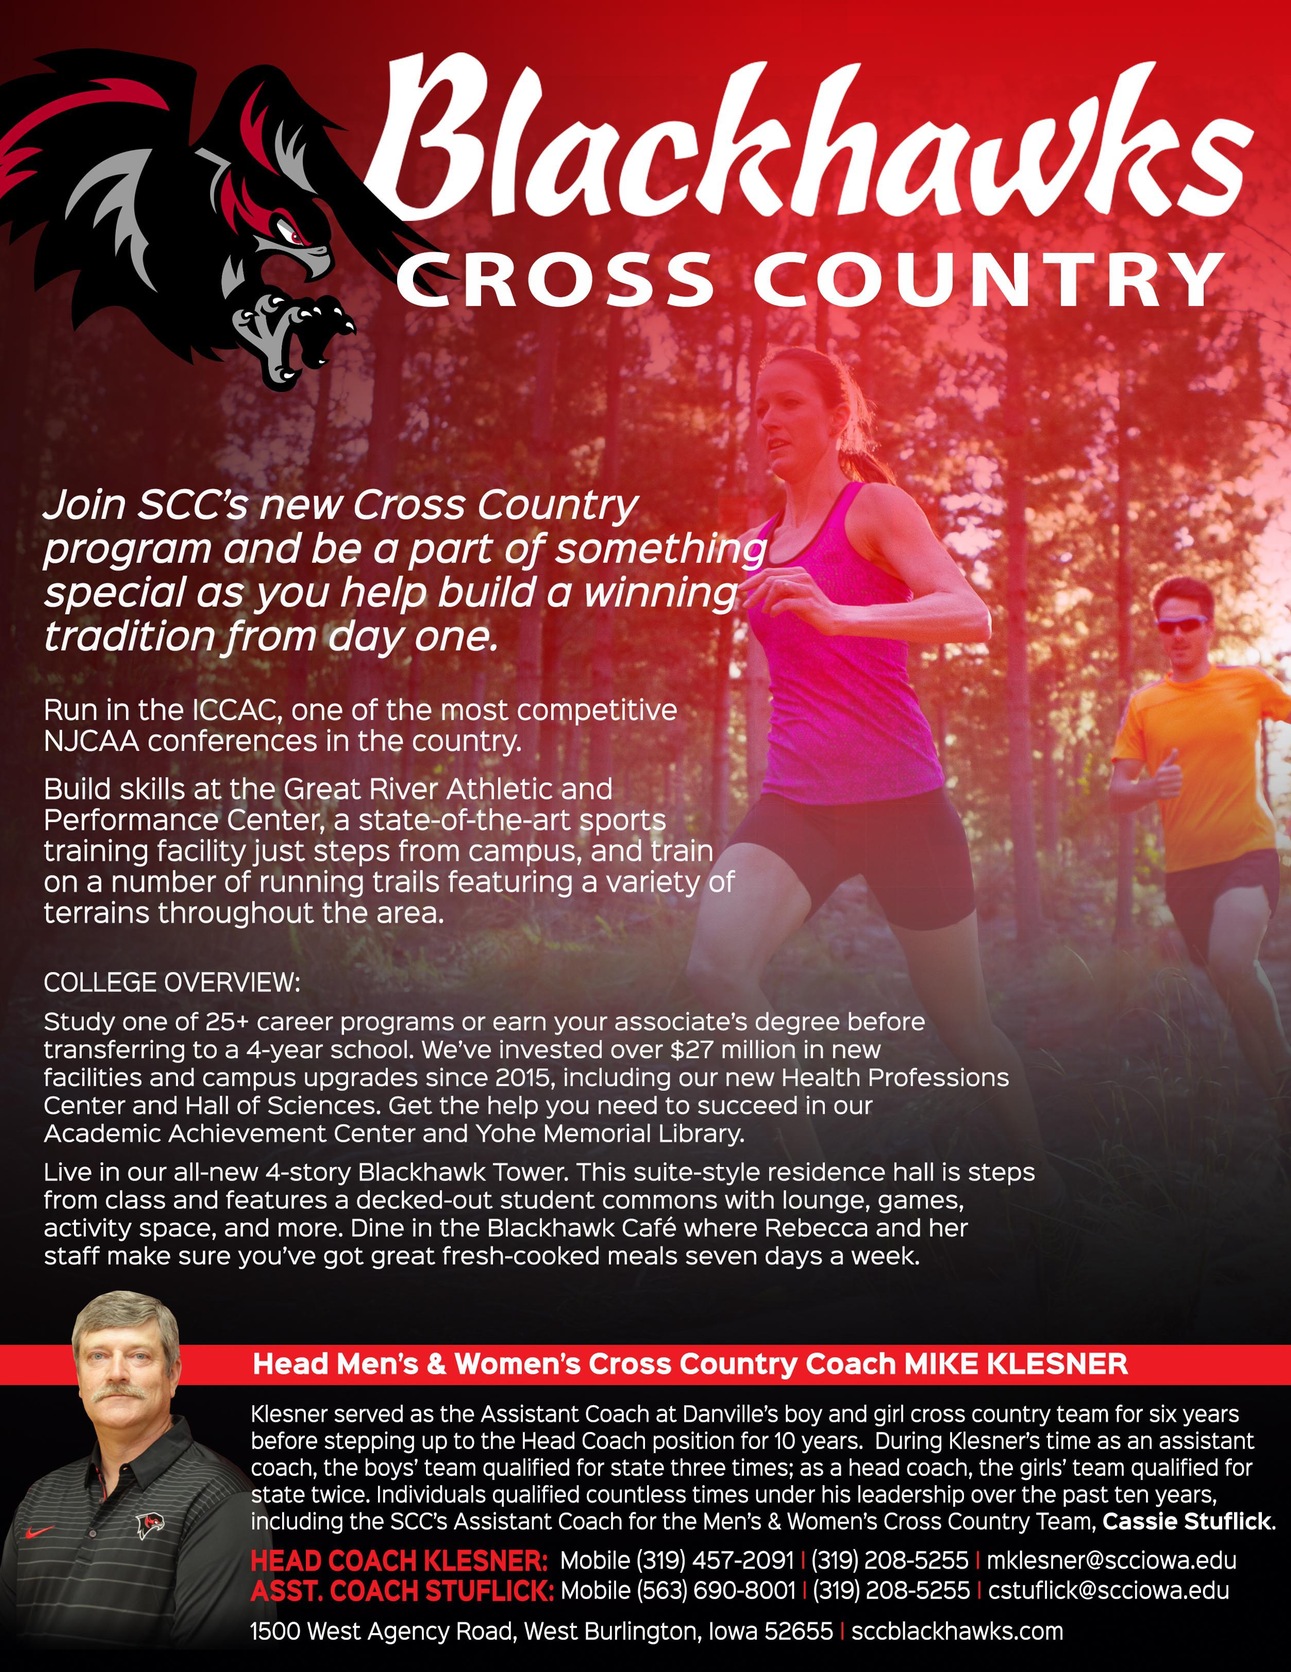 Join SCC Cross Country Team